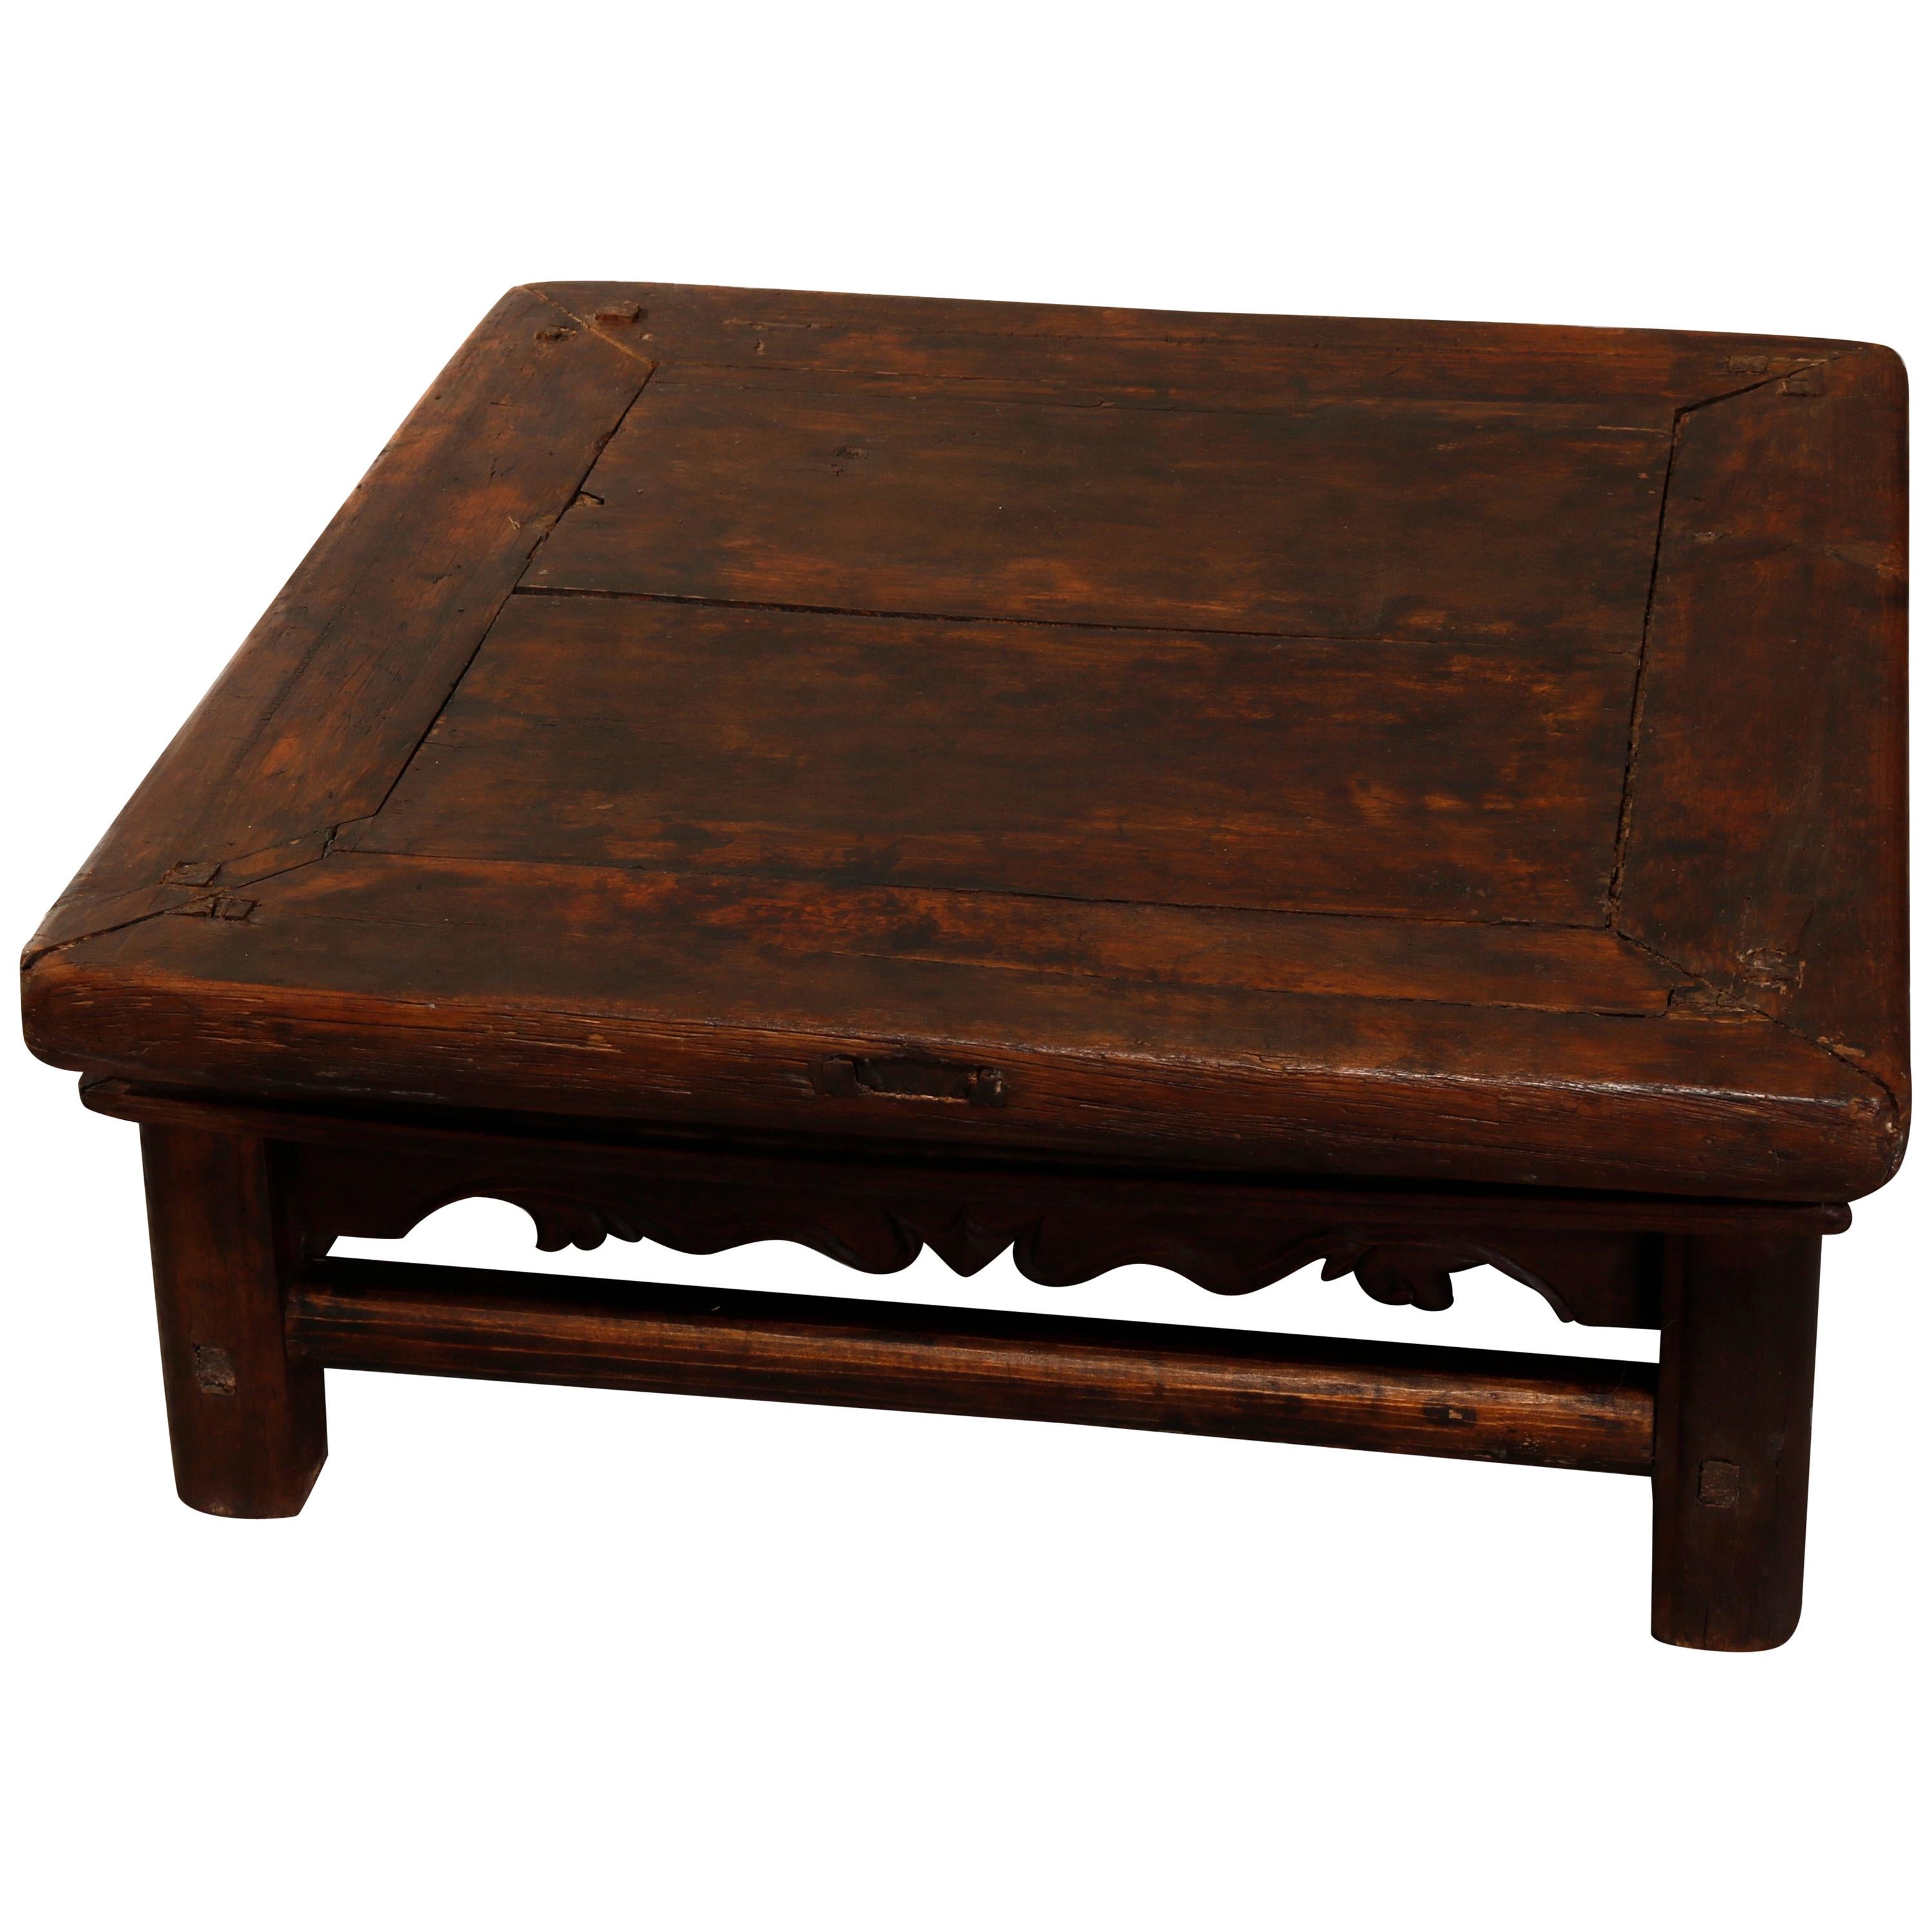 Antique Chinese Carved Hardwood Low Table, 19th Century